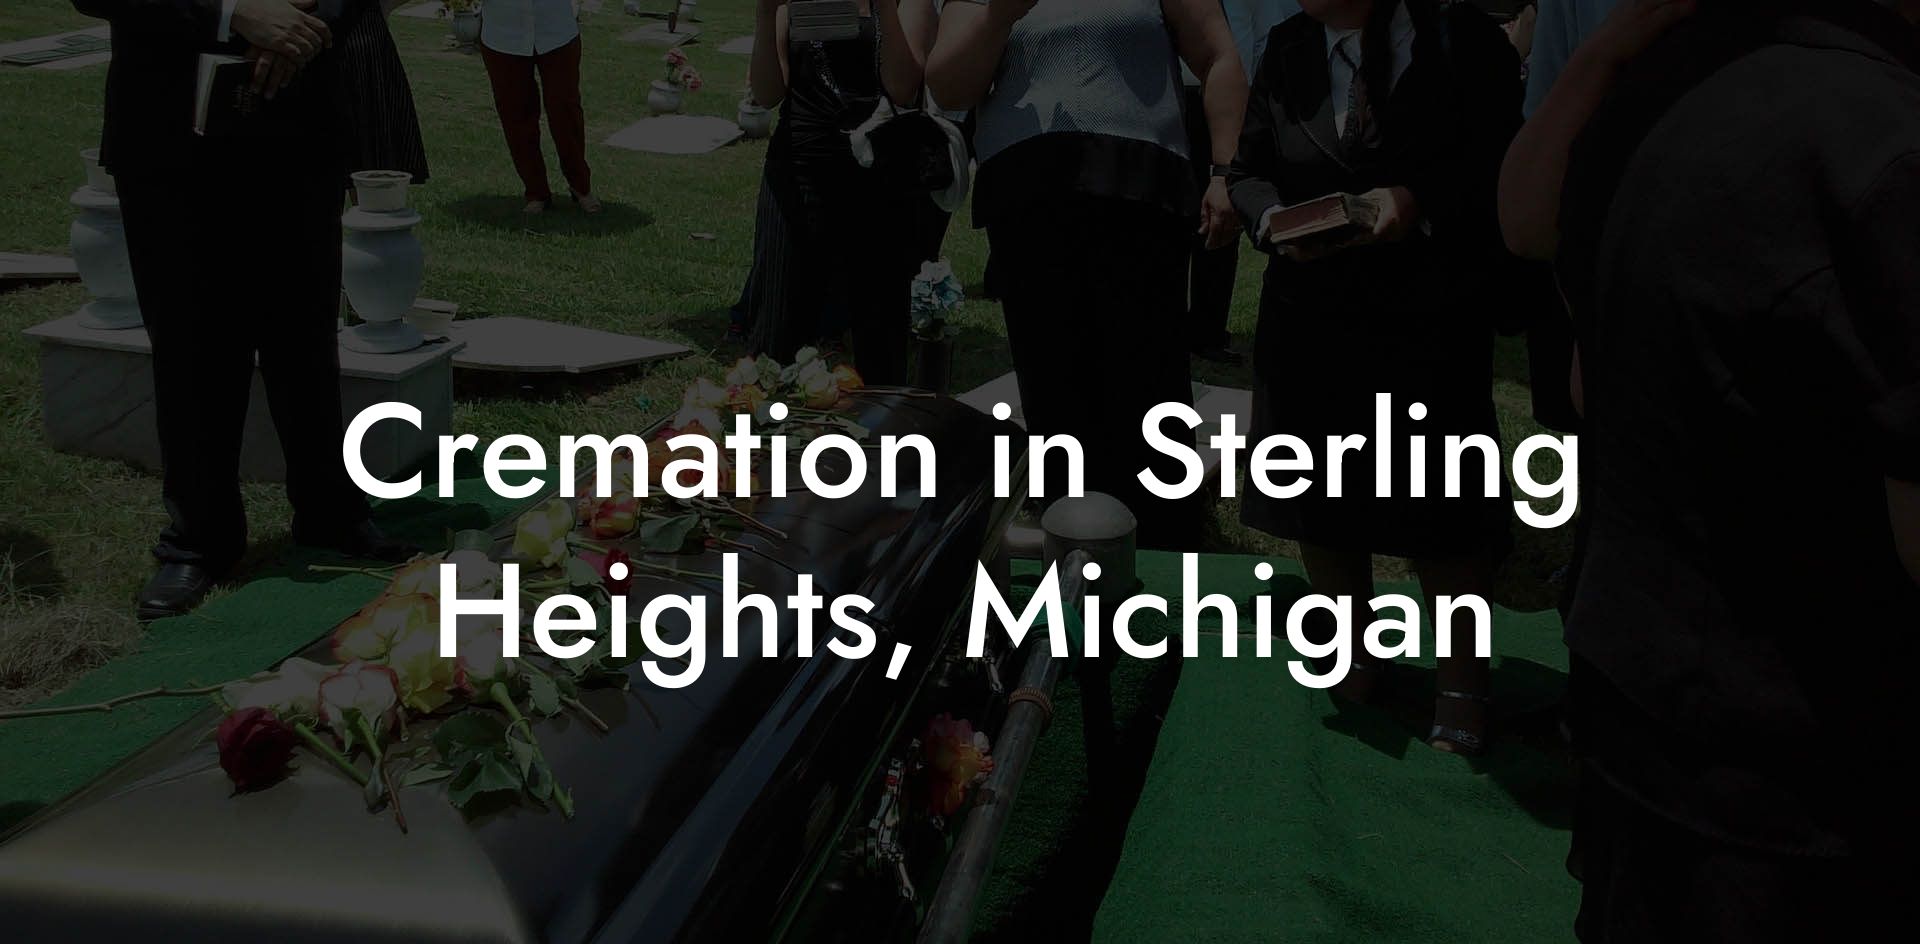 Cremation in Sterling Heights, Michigan